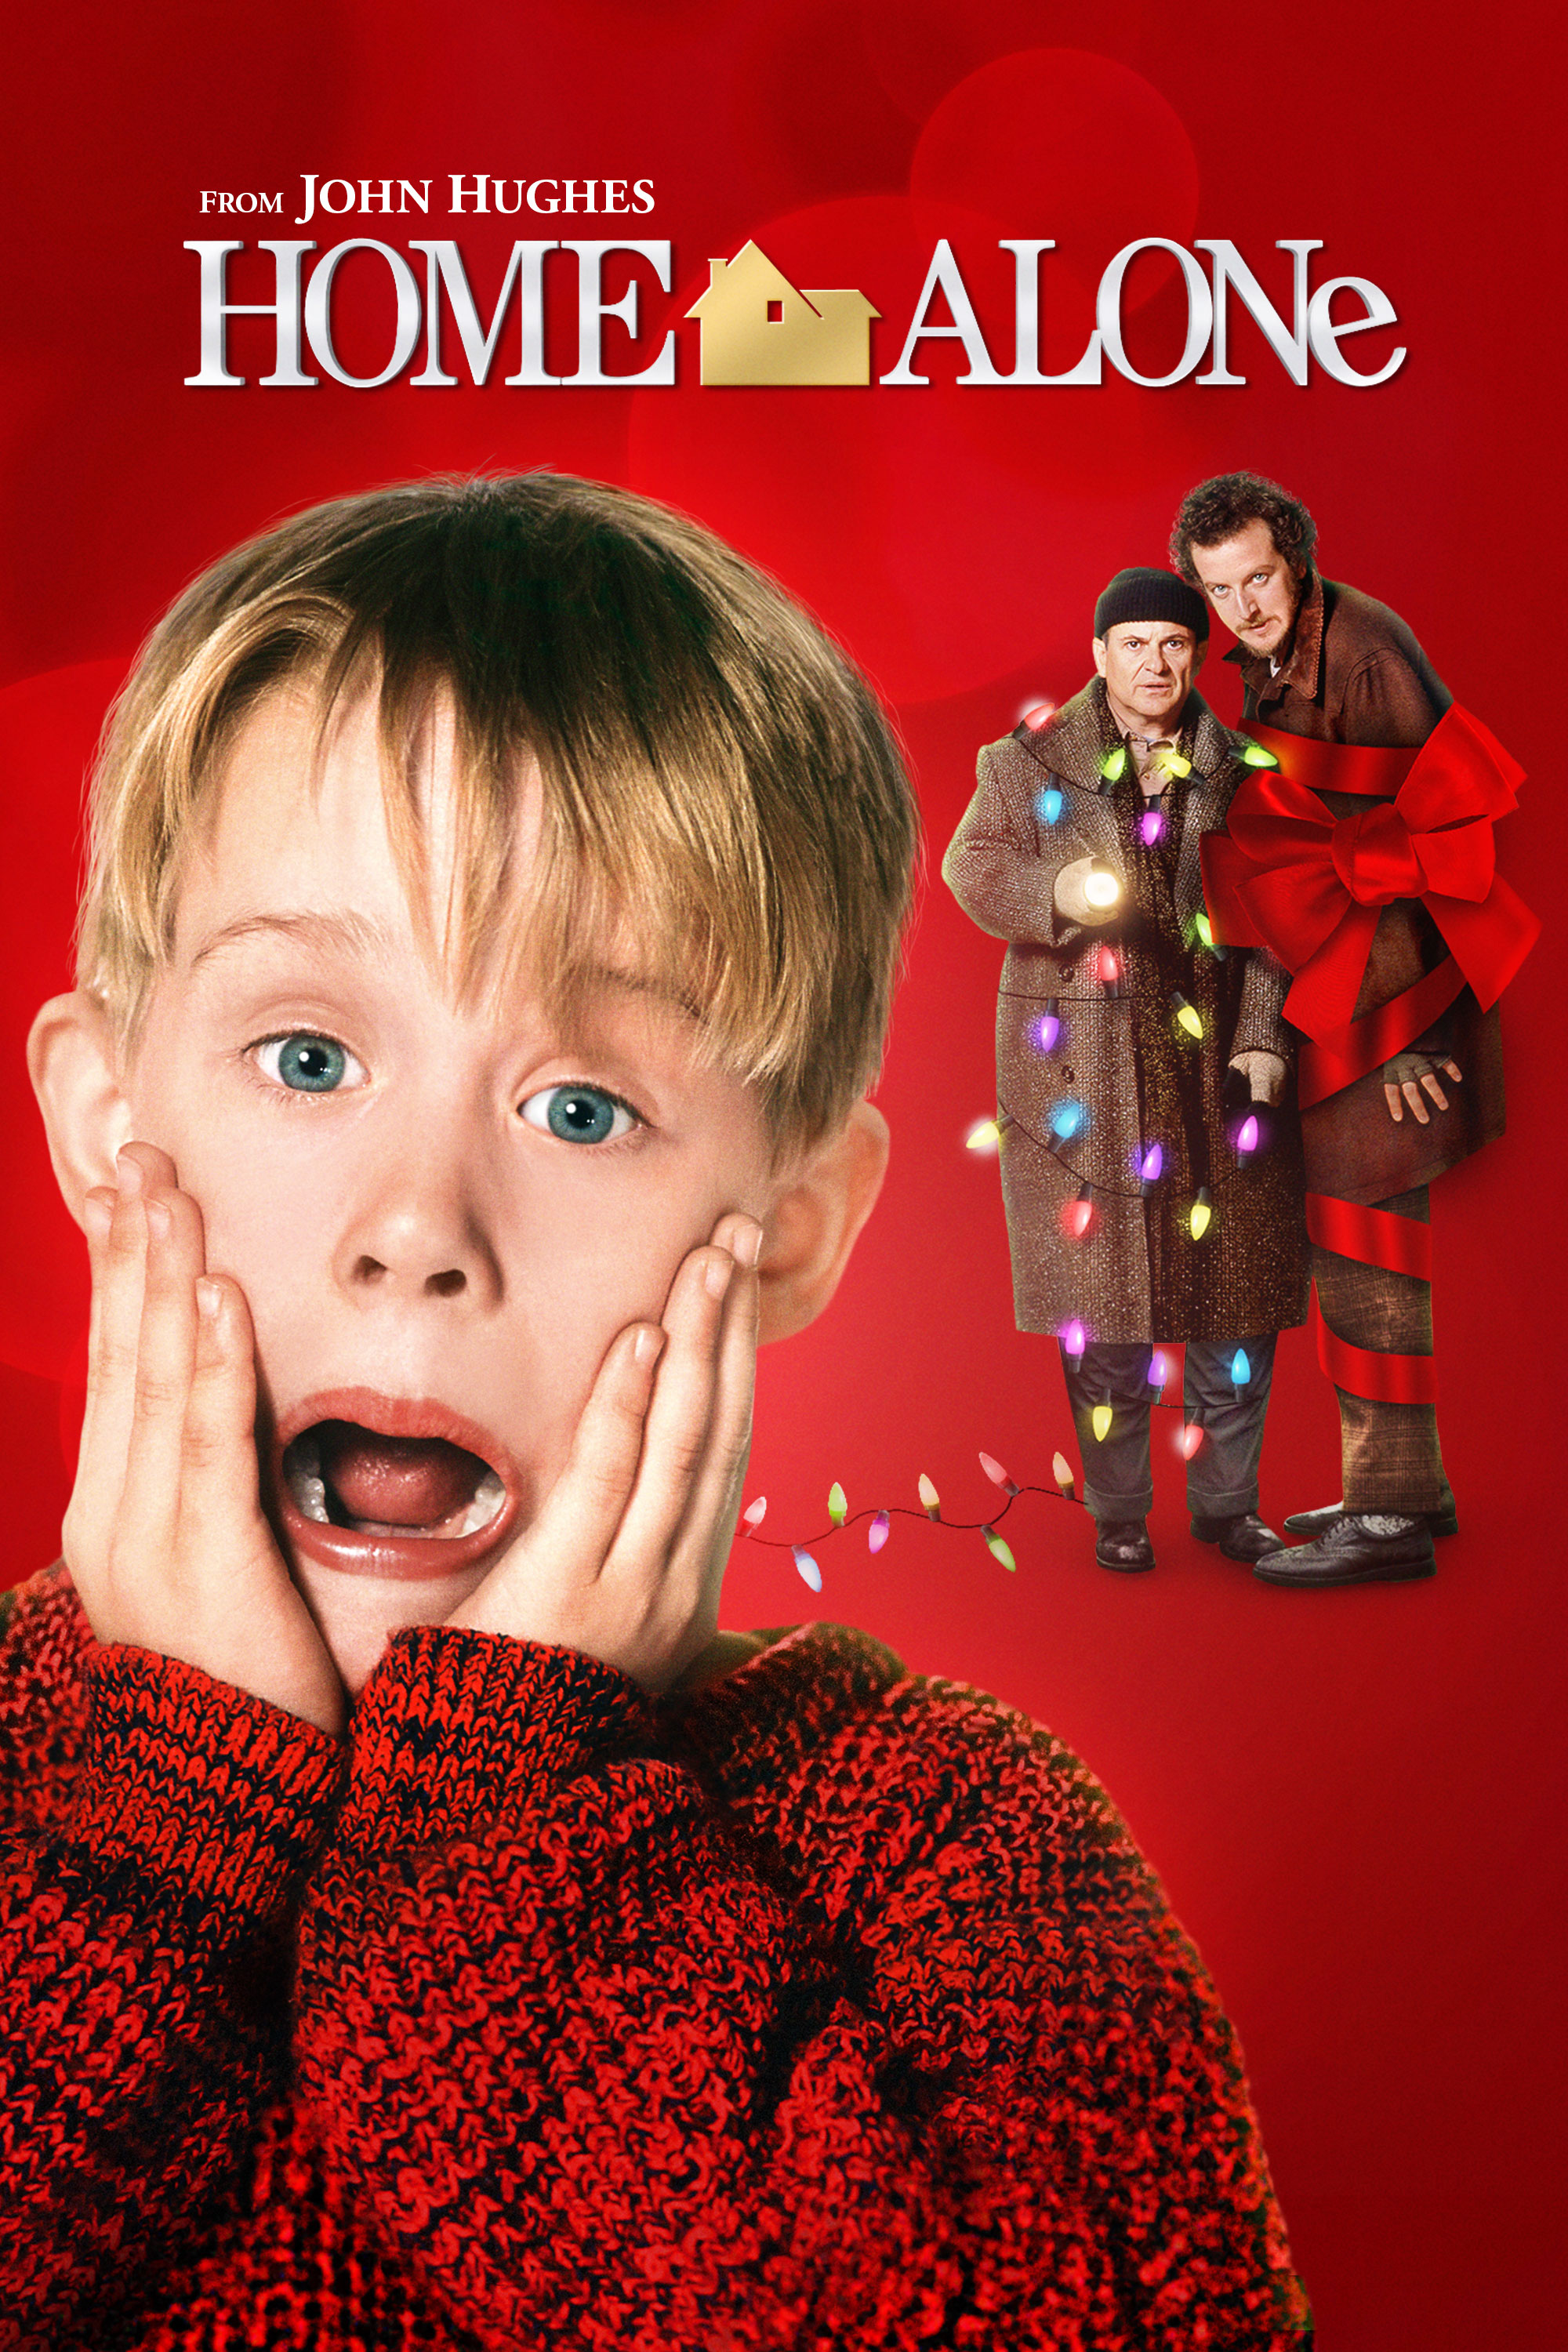 https://prod3.agileticketing.net/images/user/cace_3663/home_alone_poster.jpg